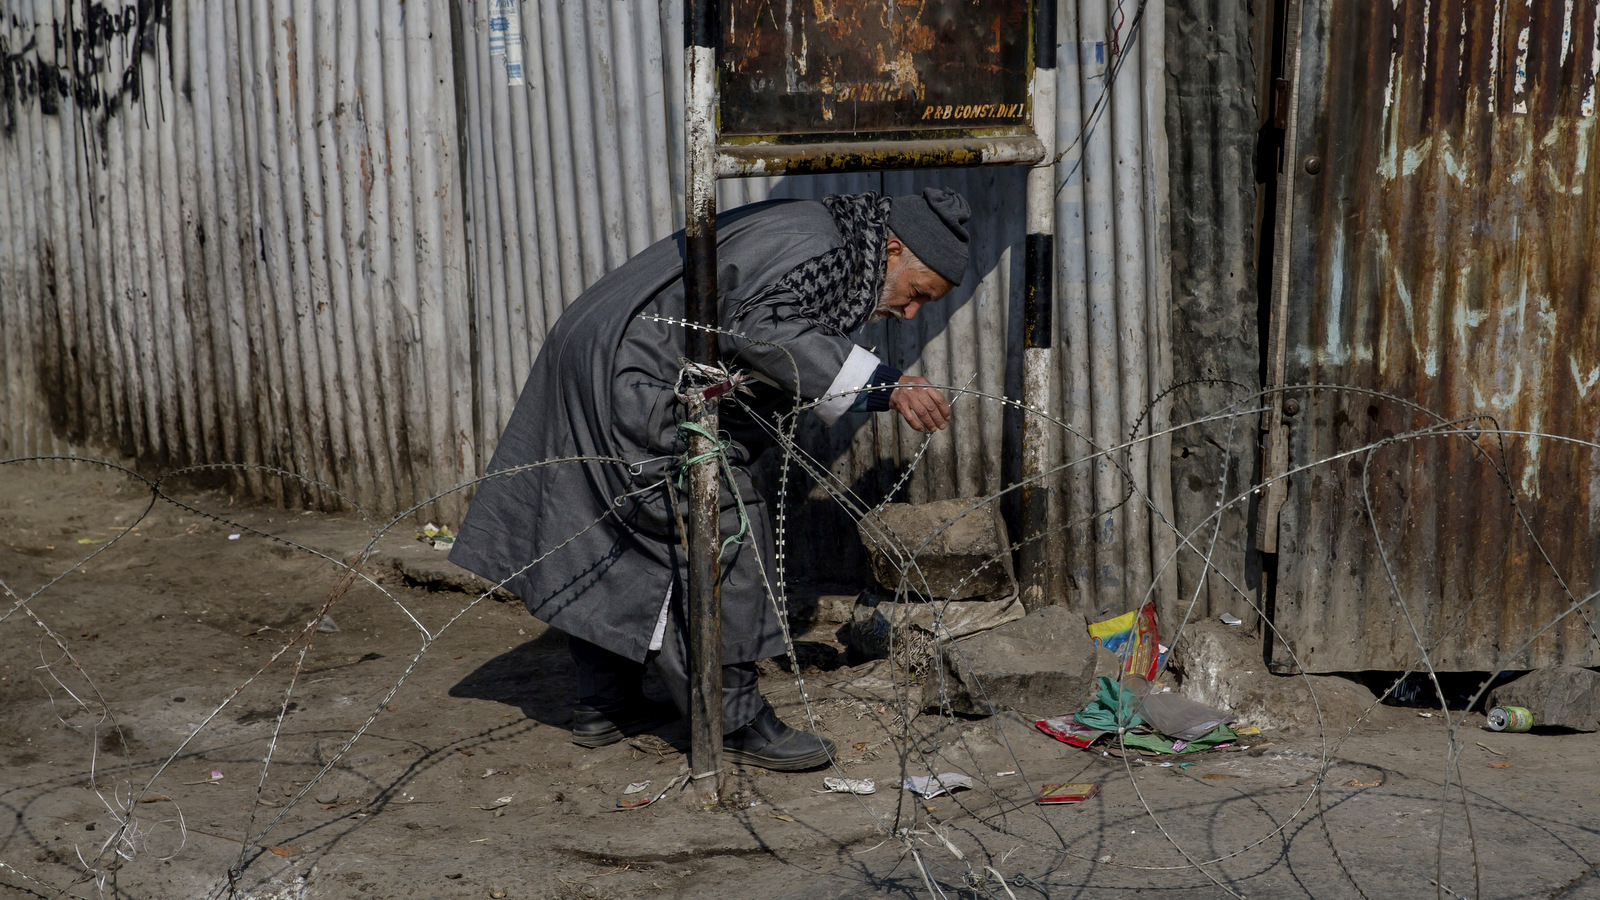 An elderly Kashmiri man kneels to walk under an iron hoarding as he makes his way past a barbed-wire road checkpoint set up by Indian security forces during a curfew in Srinagar, Indian occupied Kashmir, Feb. 9, 2017. (AP/Dar Yasin)